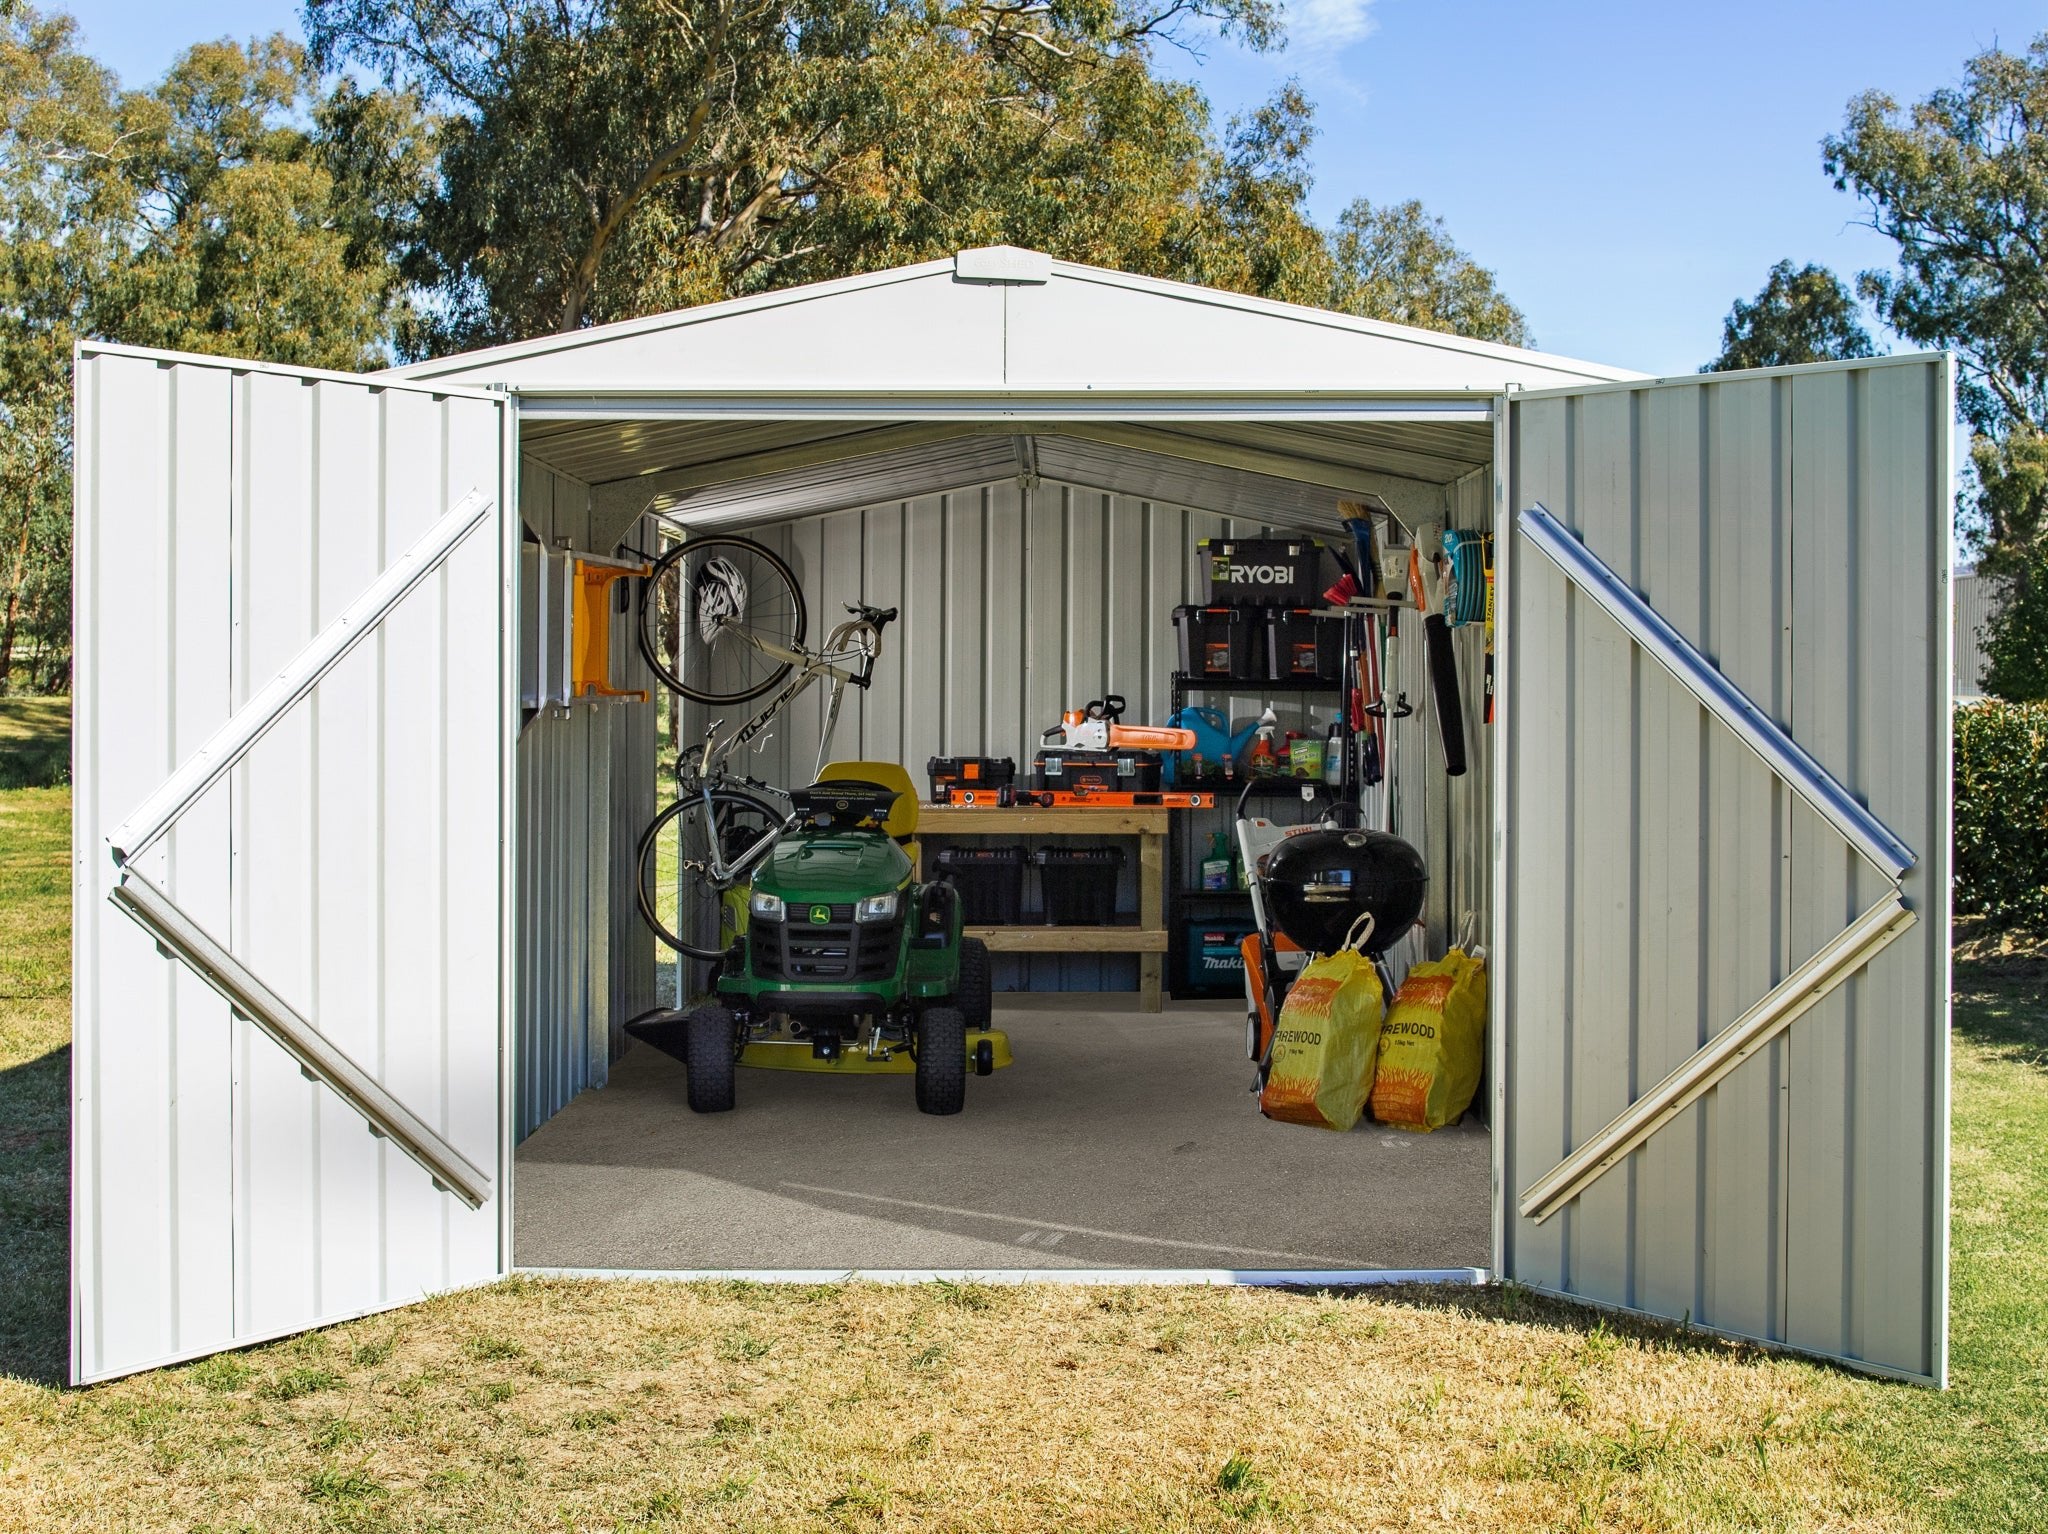 Keep Dry with a Raised Shed - EasyShed